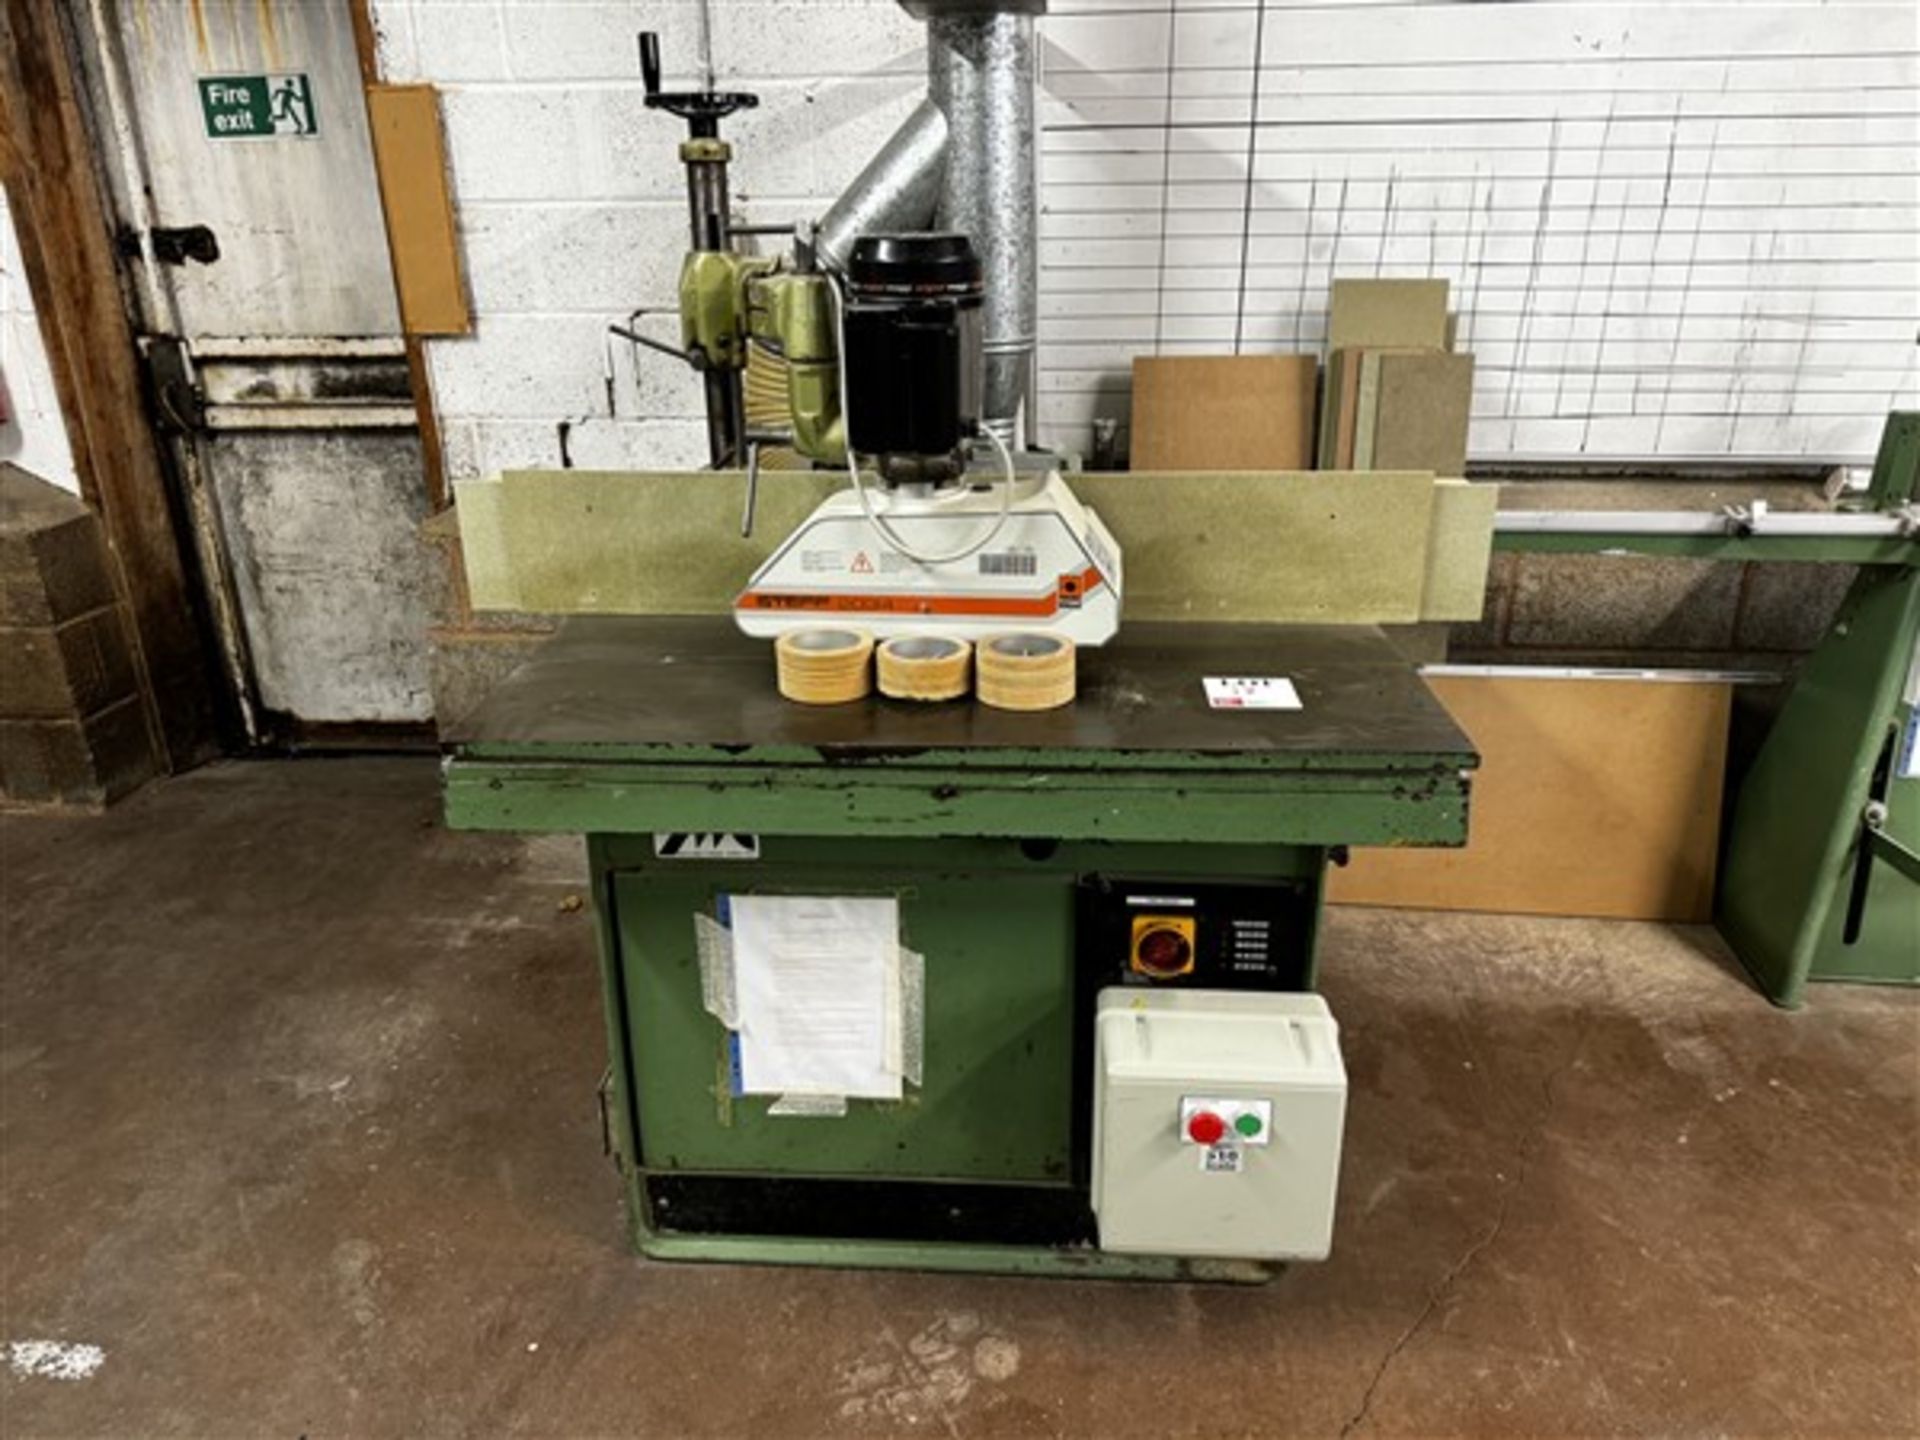 NMC spindle moulder, 380v, type F-115, serial no. 85/43/218, with Maggi feed unit, type 12720501,